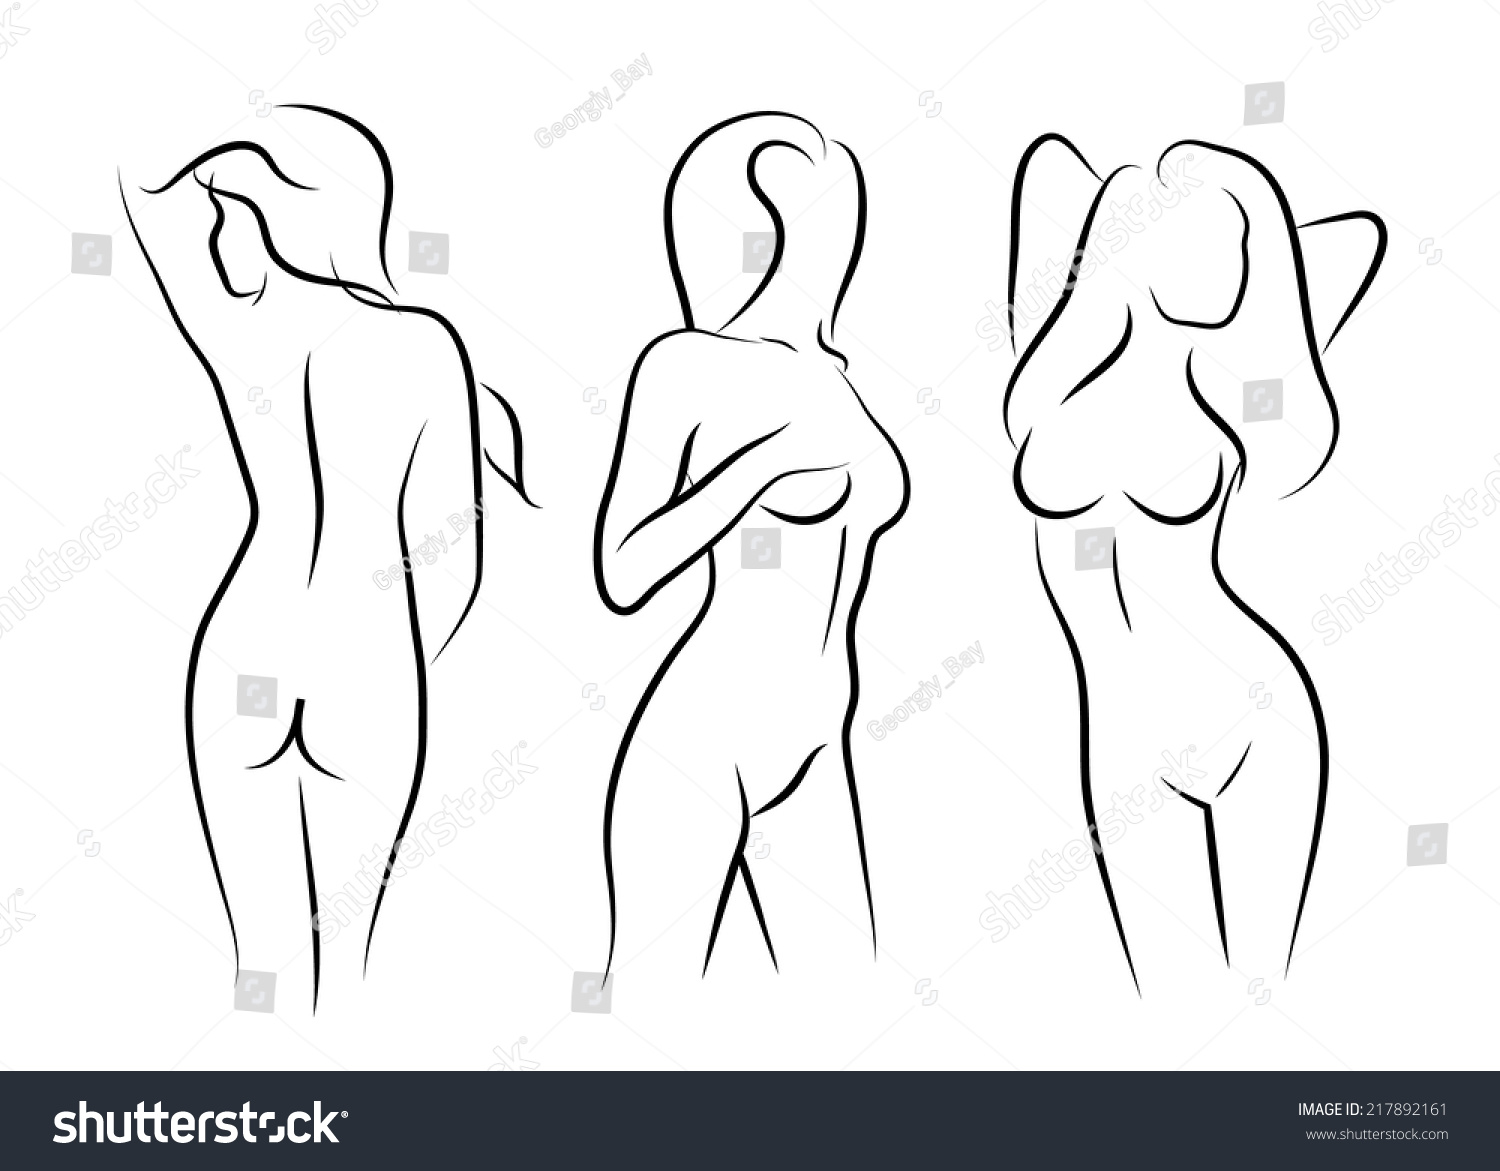 How To Draw The Nude 50